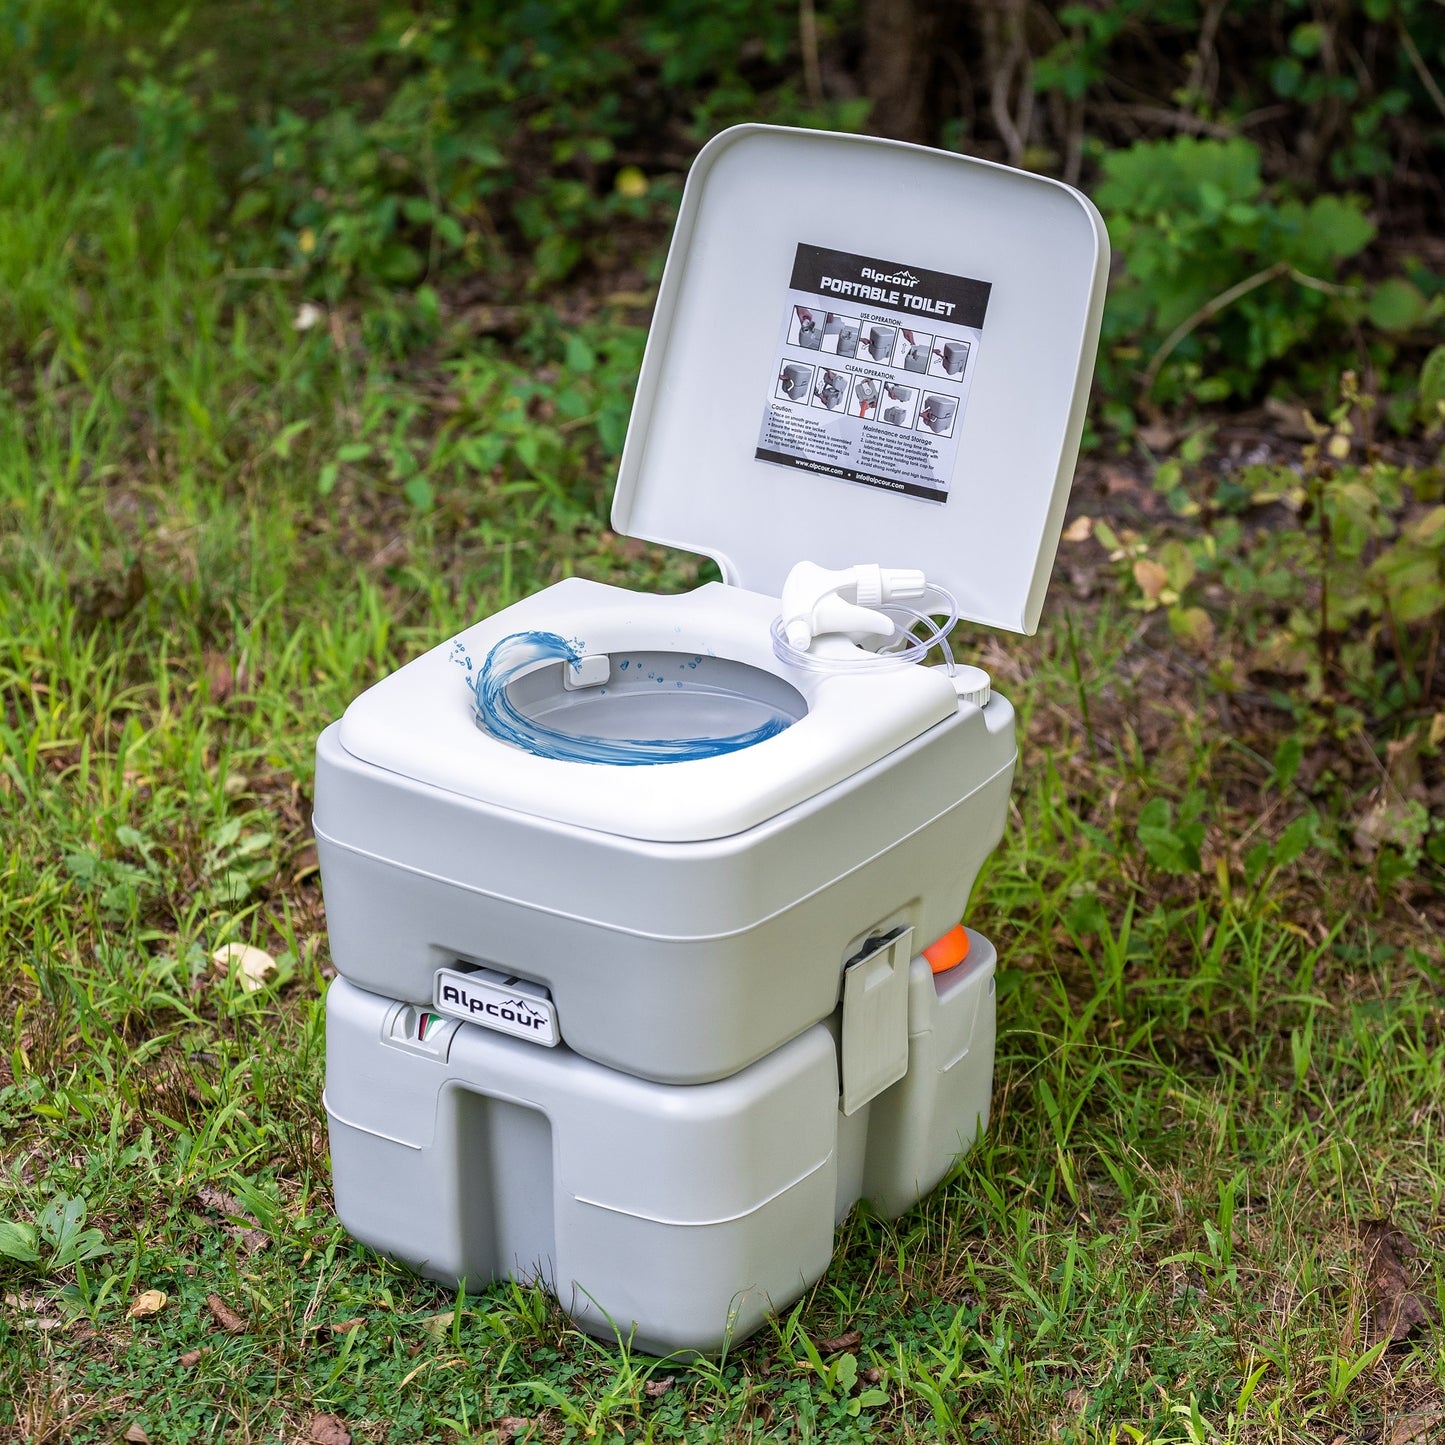 Portable Toilet – Compact Indoor Outdoor Commode w/Travel Bag, Piston  Flush, 5.3 Gallon Waste Camping, RV, Boat & More